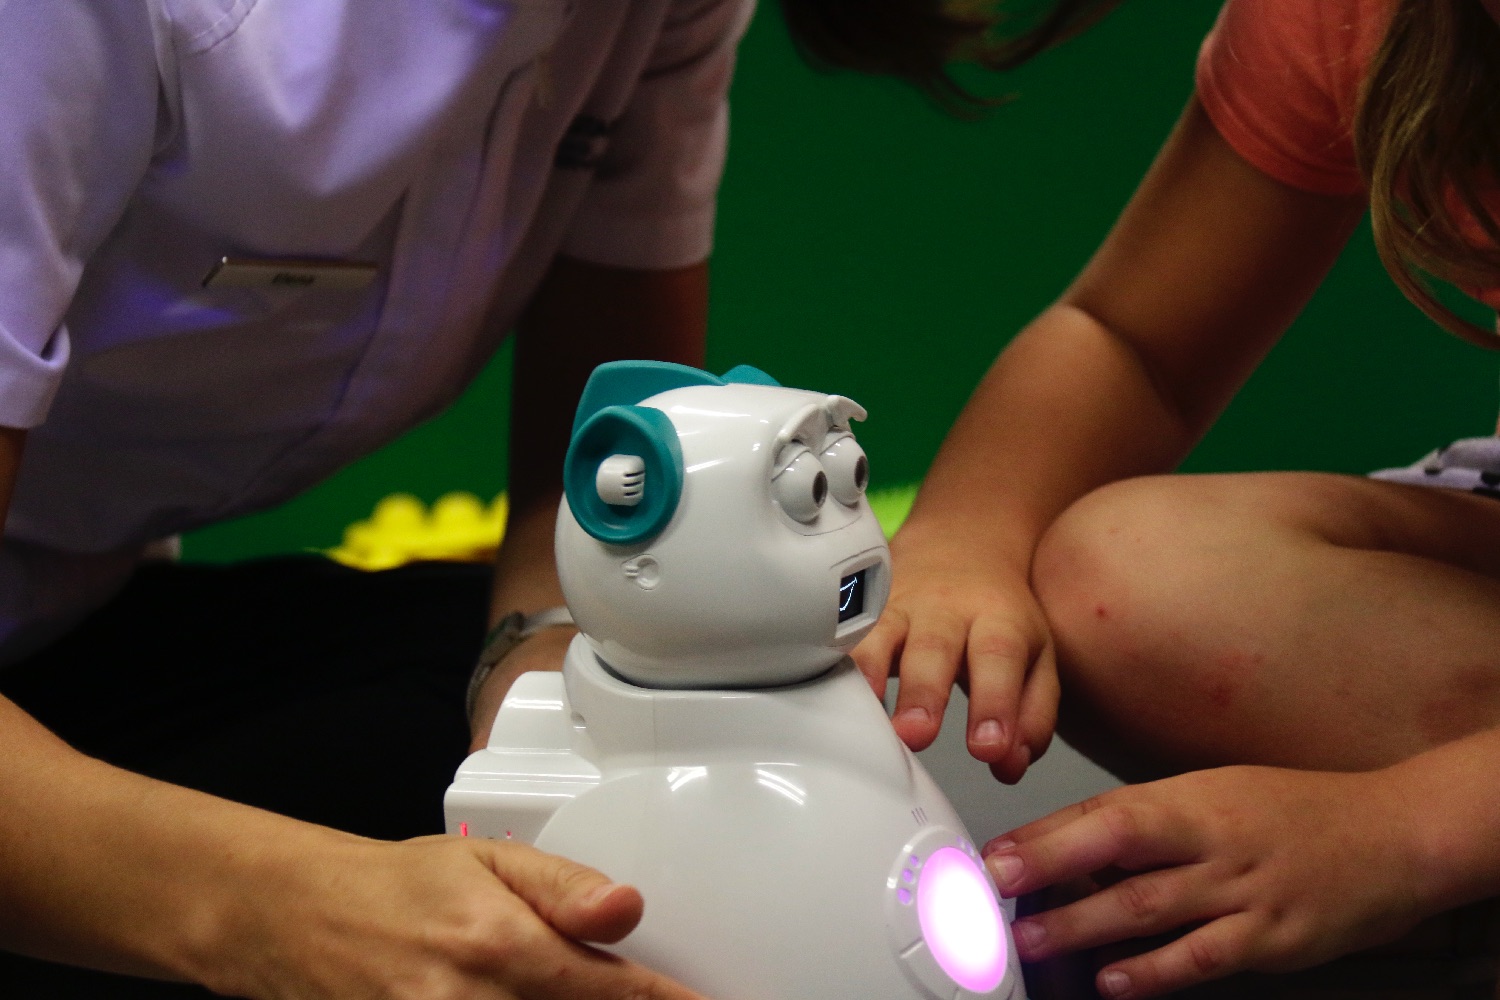 robot could help kids with autism mg 0850